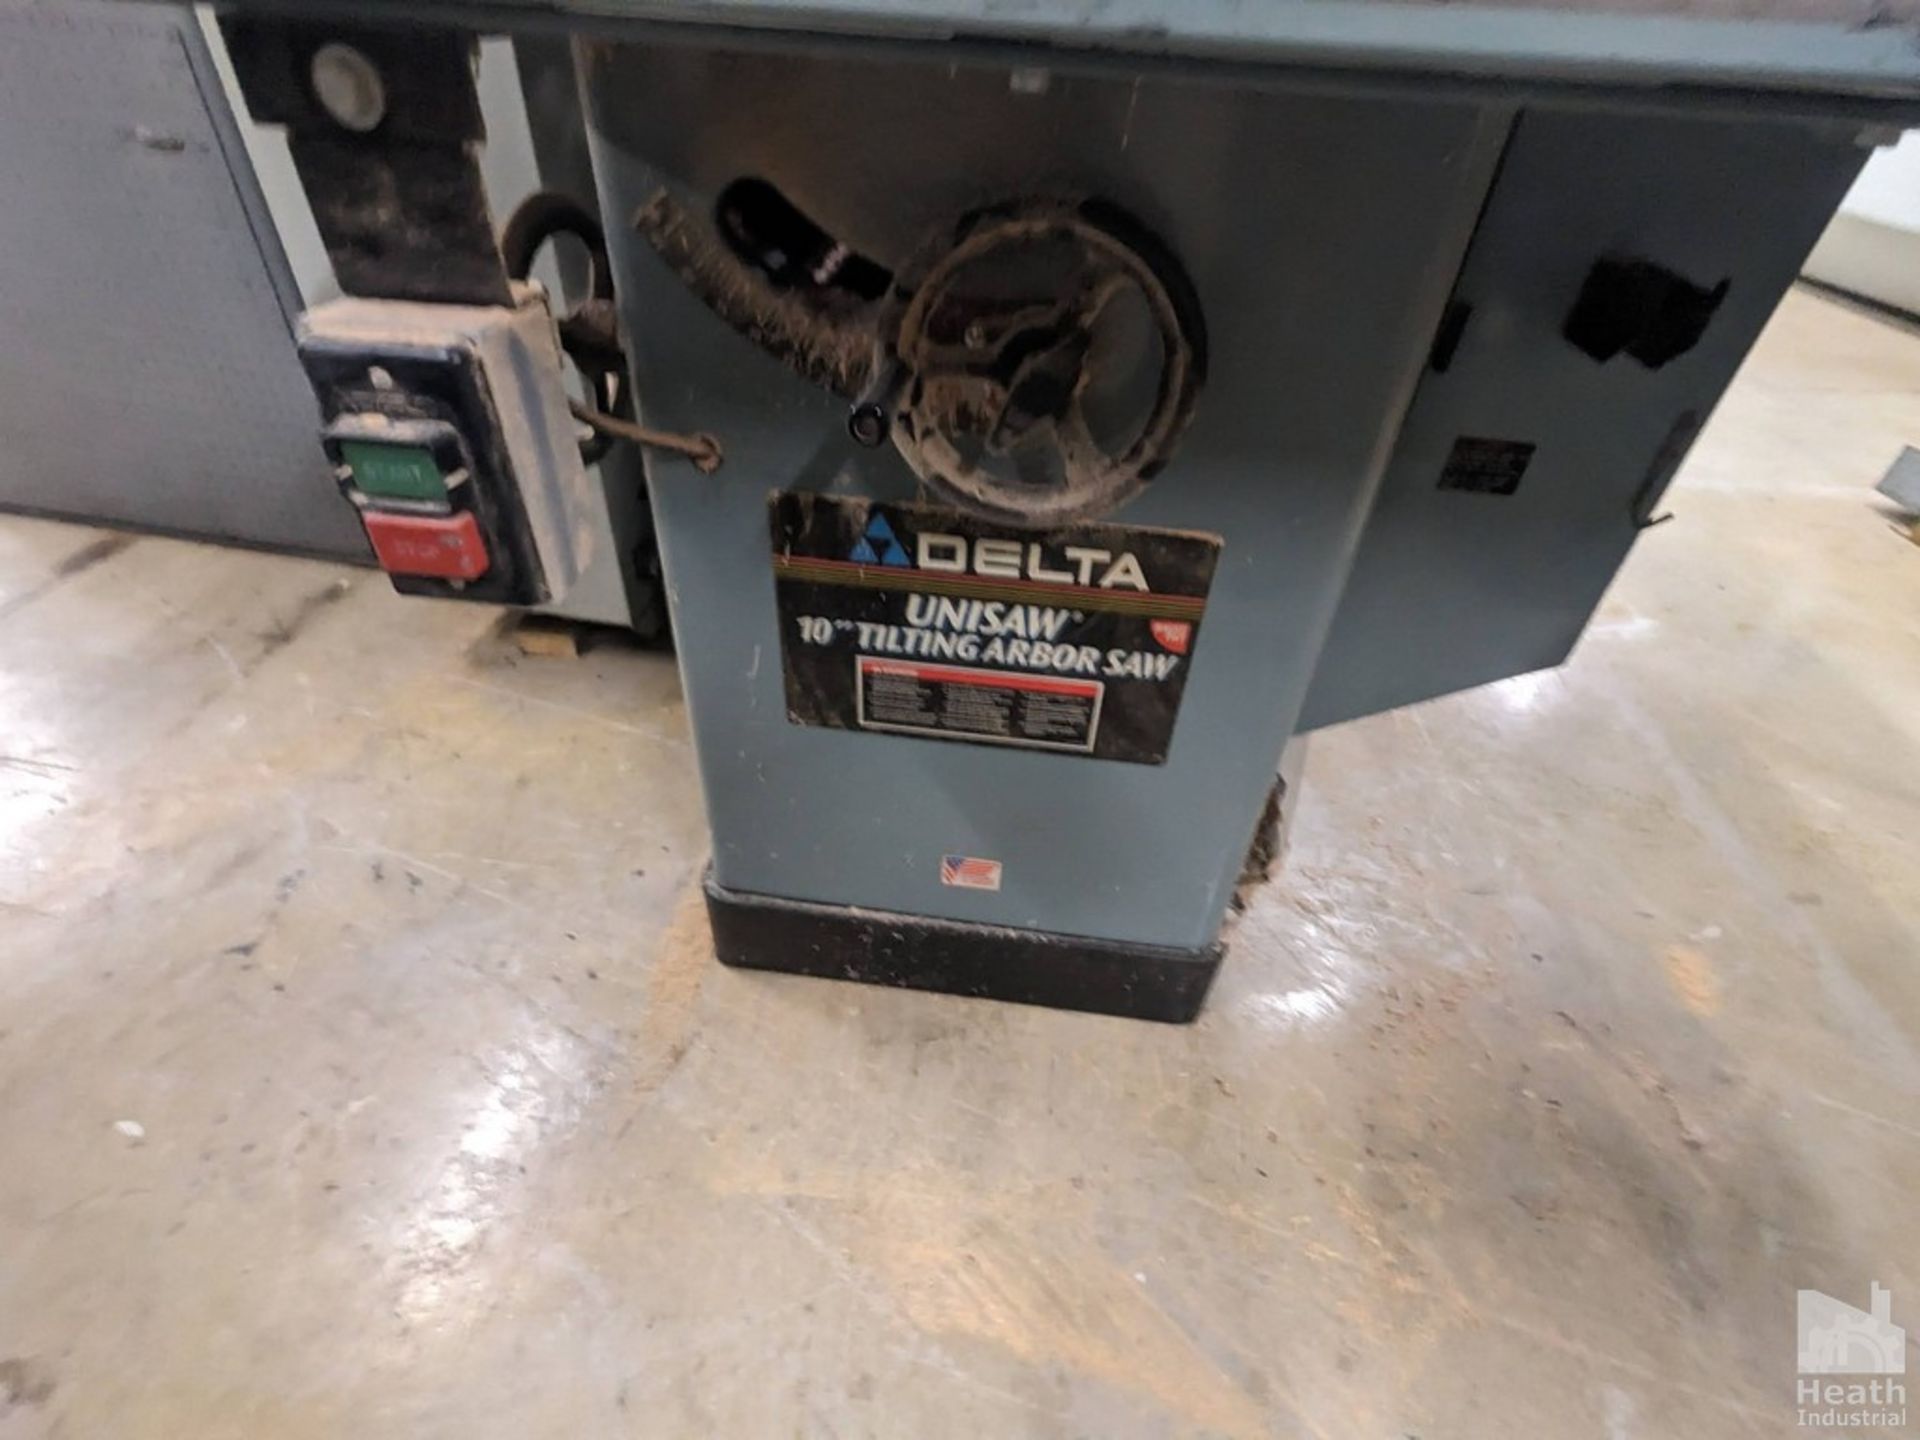 DELTA UNISAW 10" TILTING ARBOR TABLE SAW WITH EXTENDED TABLE BEISEMETER FENCE Loading Fee :$100 - Image 2 of 8